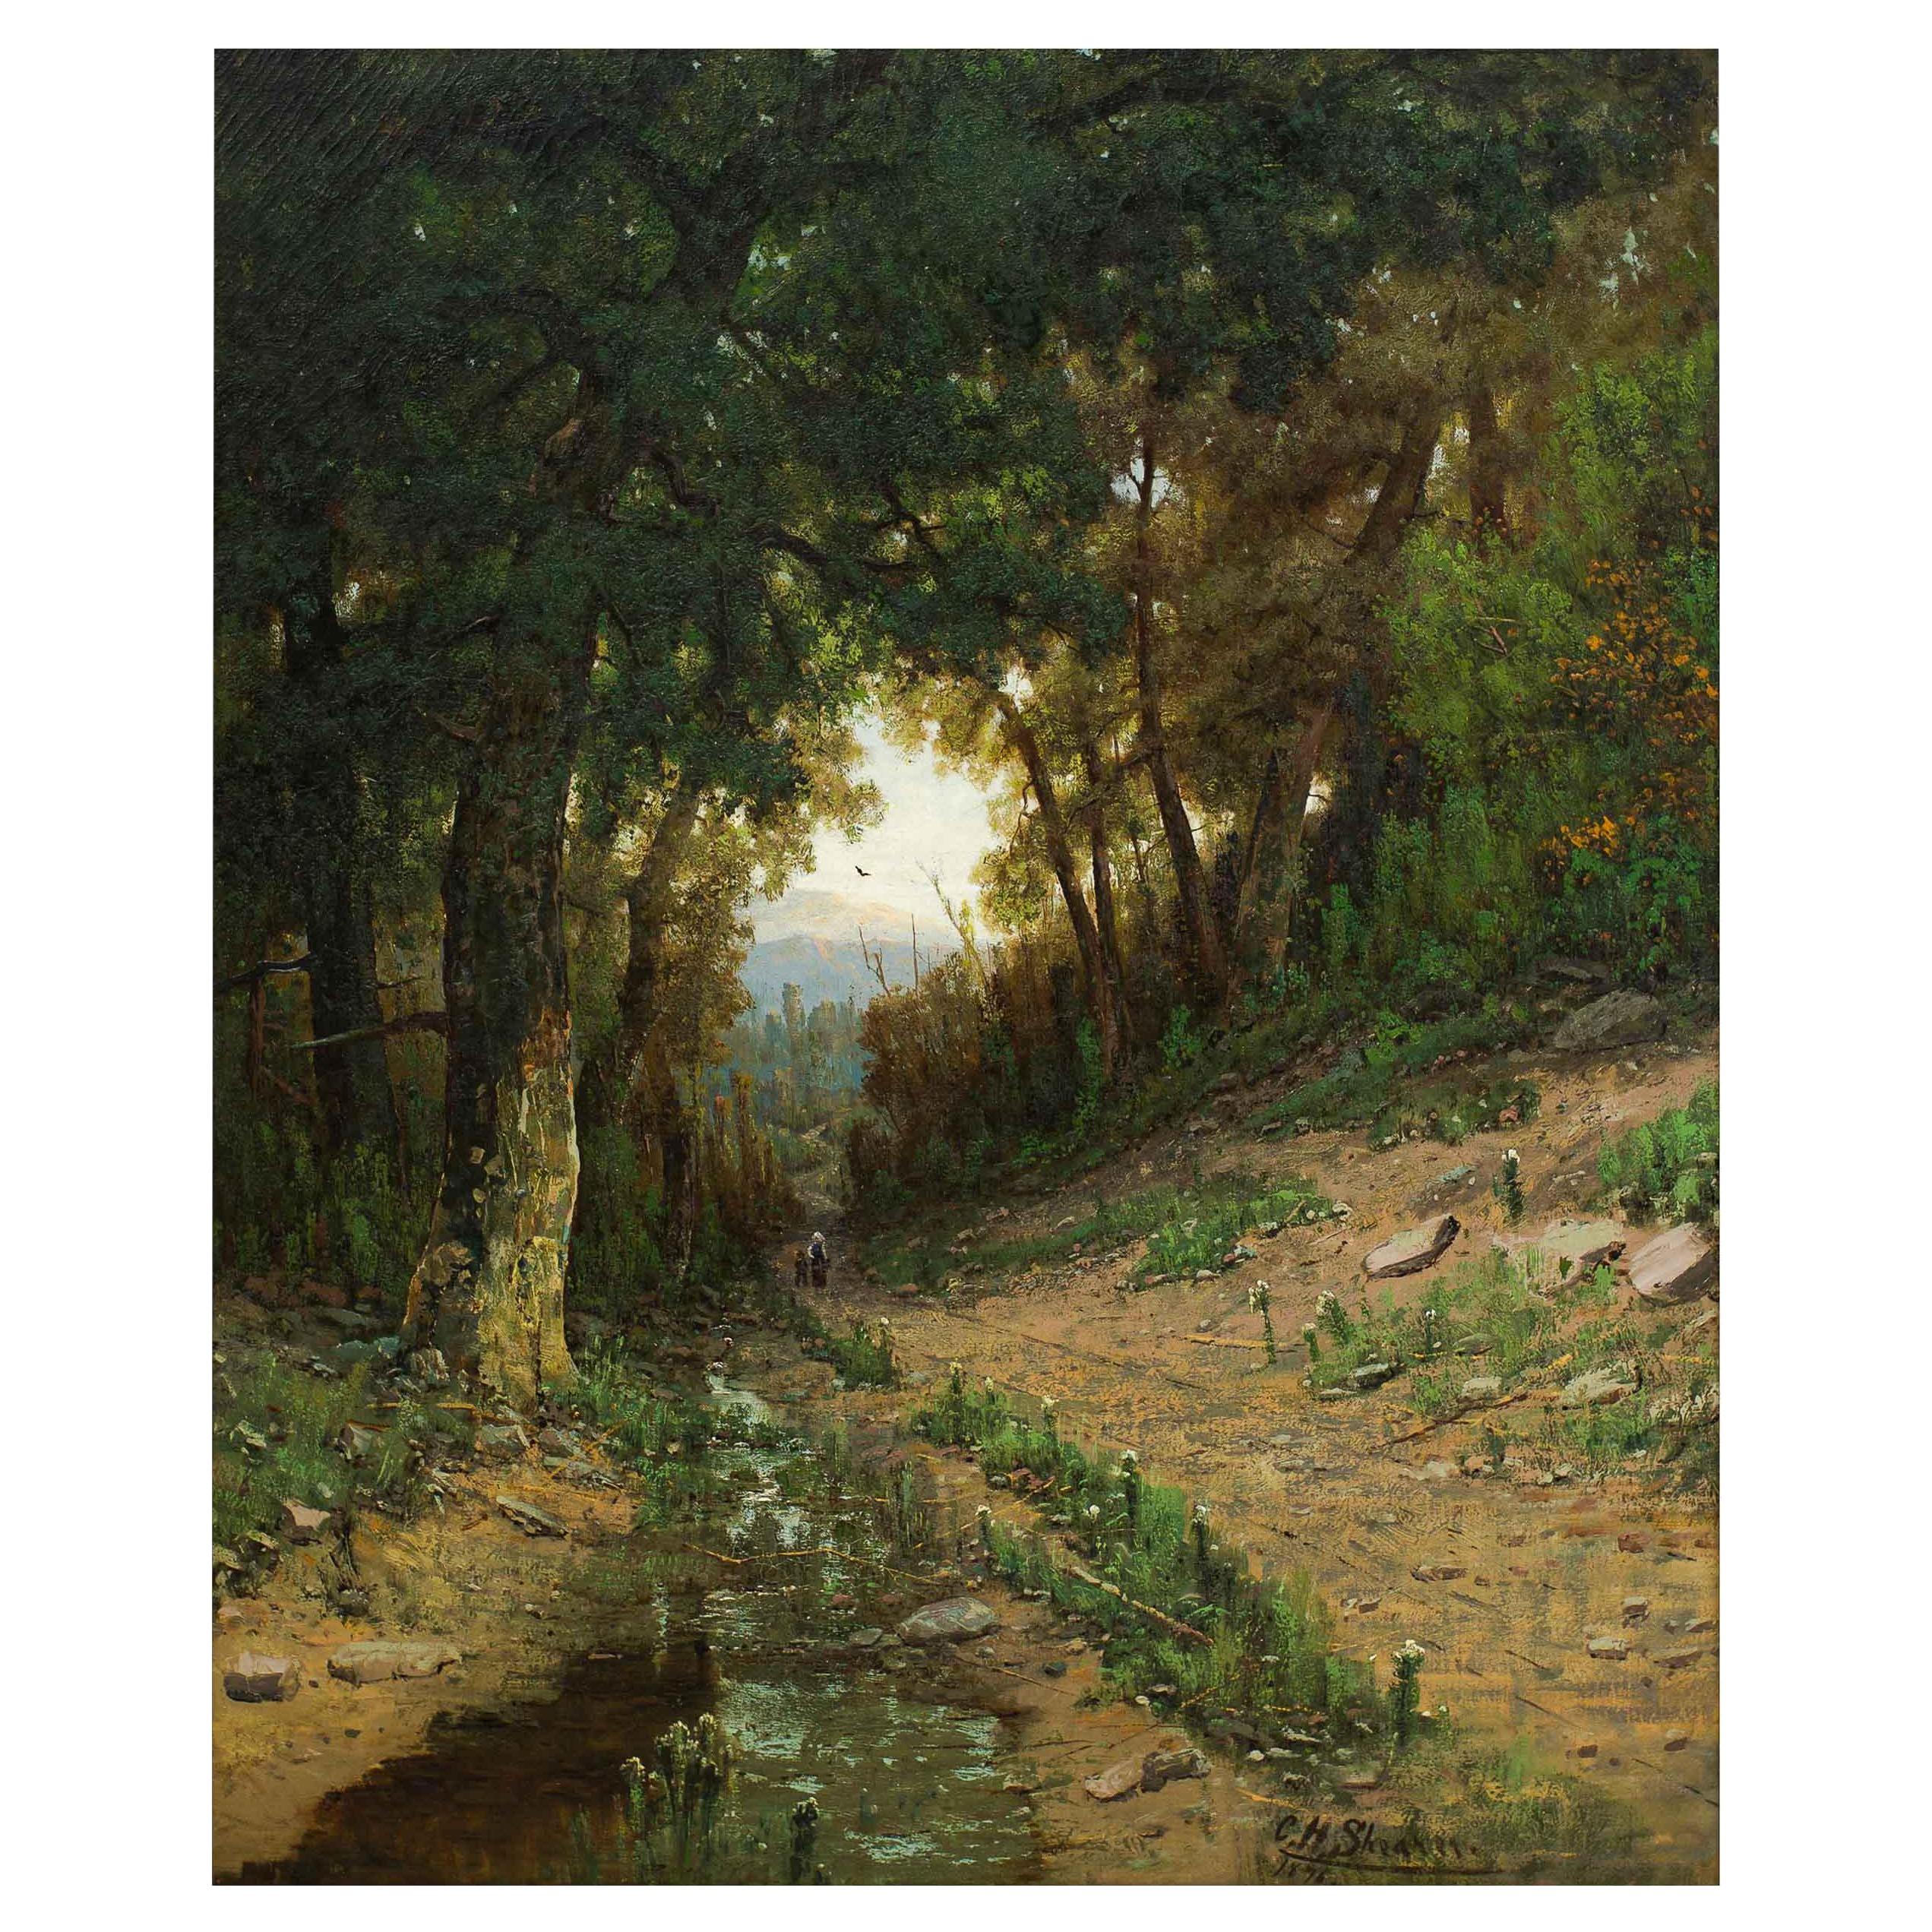 Landscape Painting "Path in the White Mountains" (1876) by Christopher Shearer